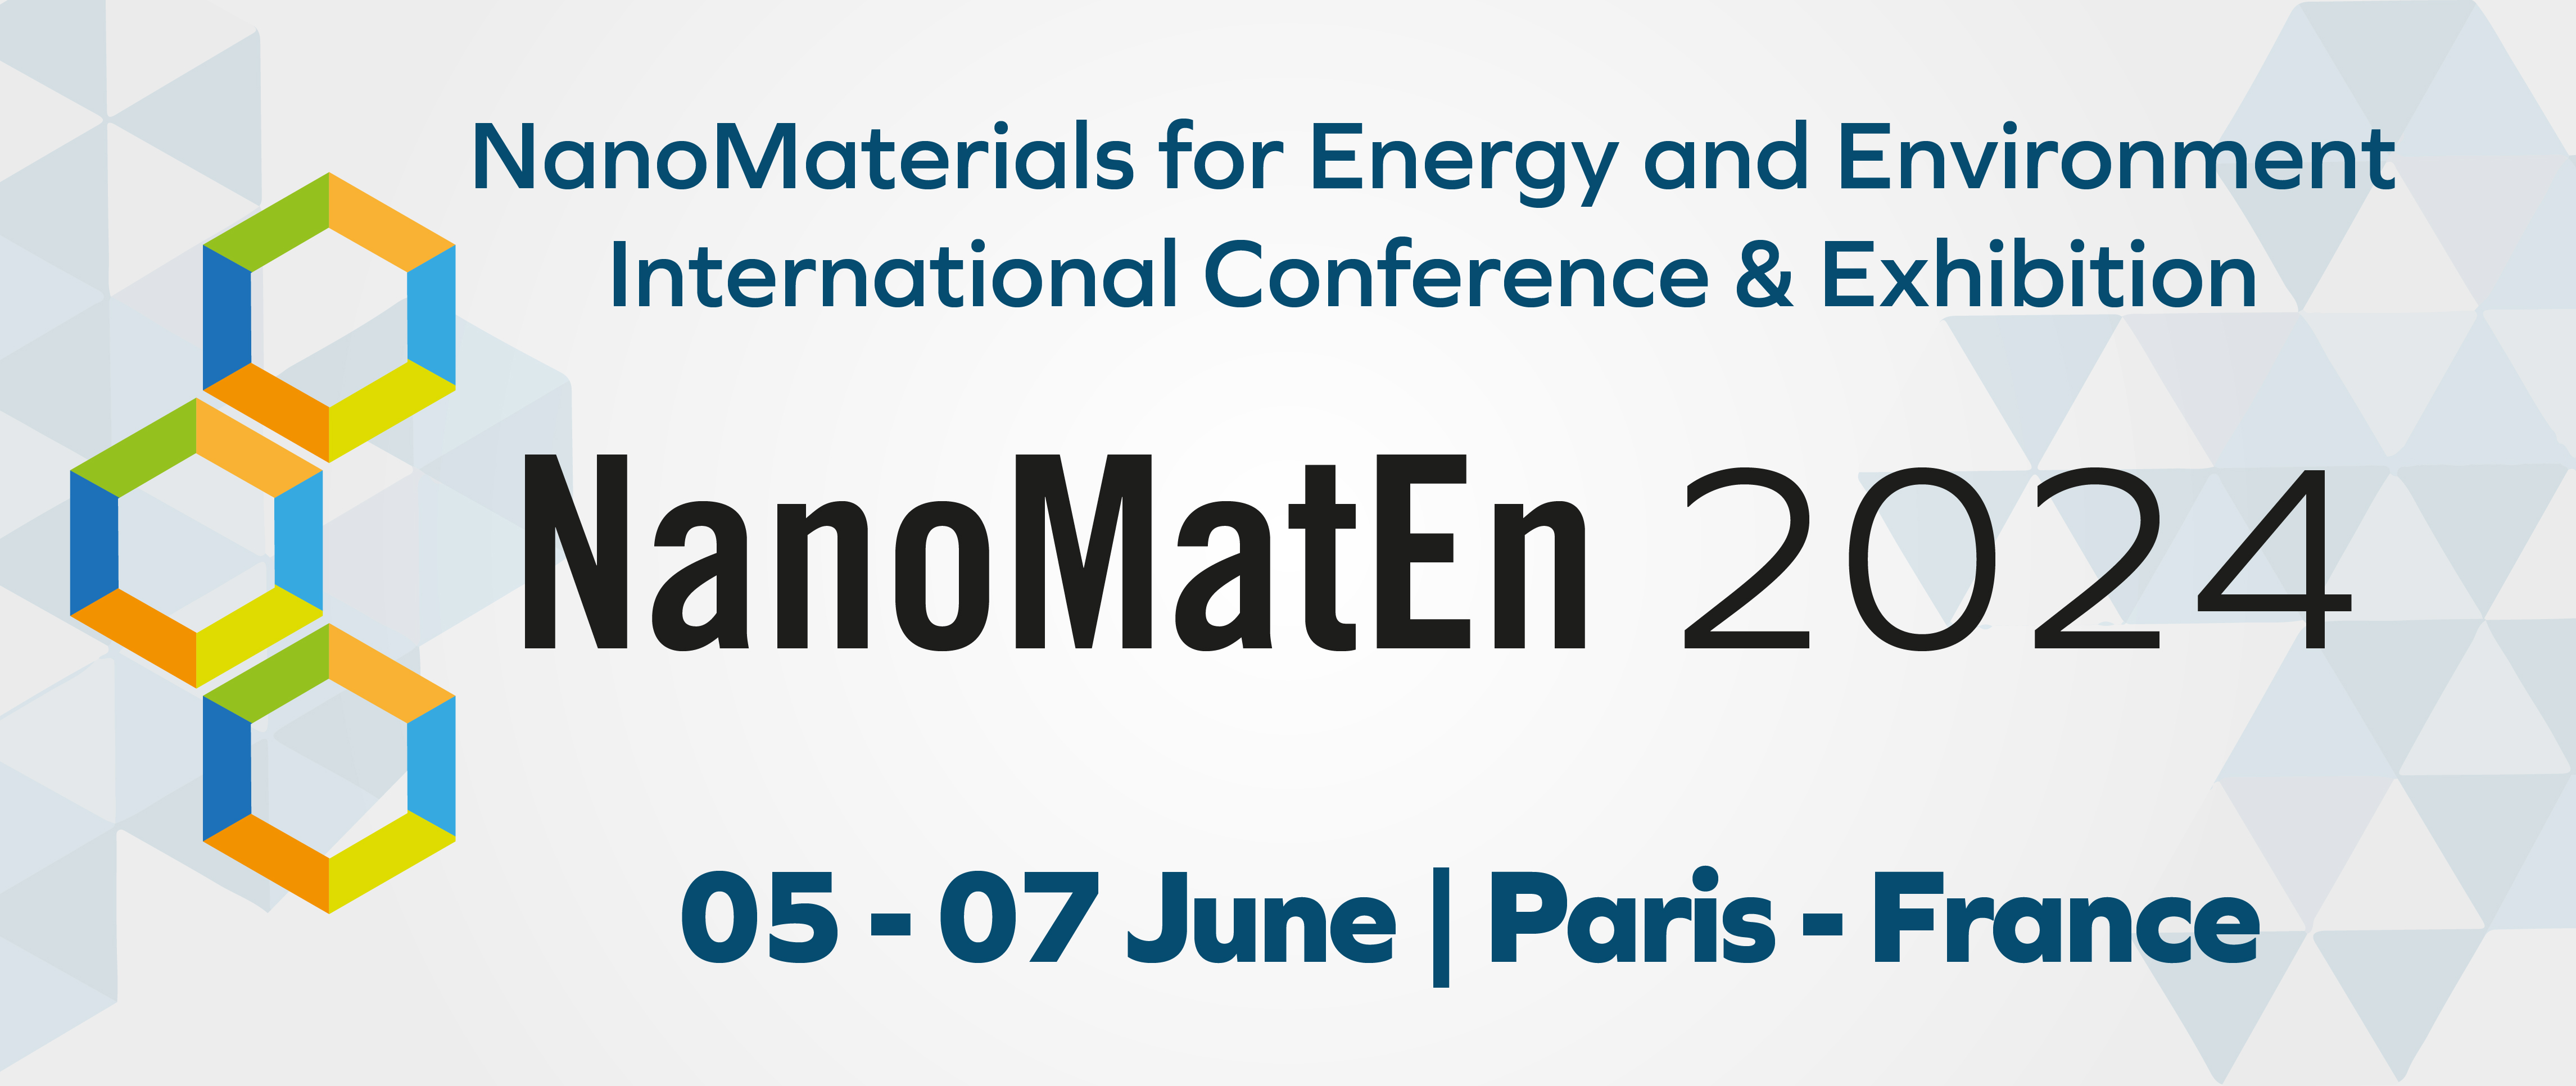 The 9th Ed. of the International conference on NanoMaterials for Energy & Environment - NanoMatEn 2024, 05 - 07 June 2024, Paris, France